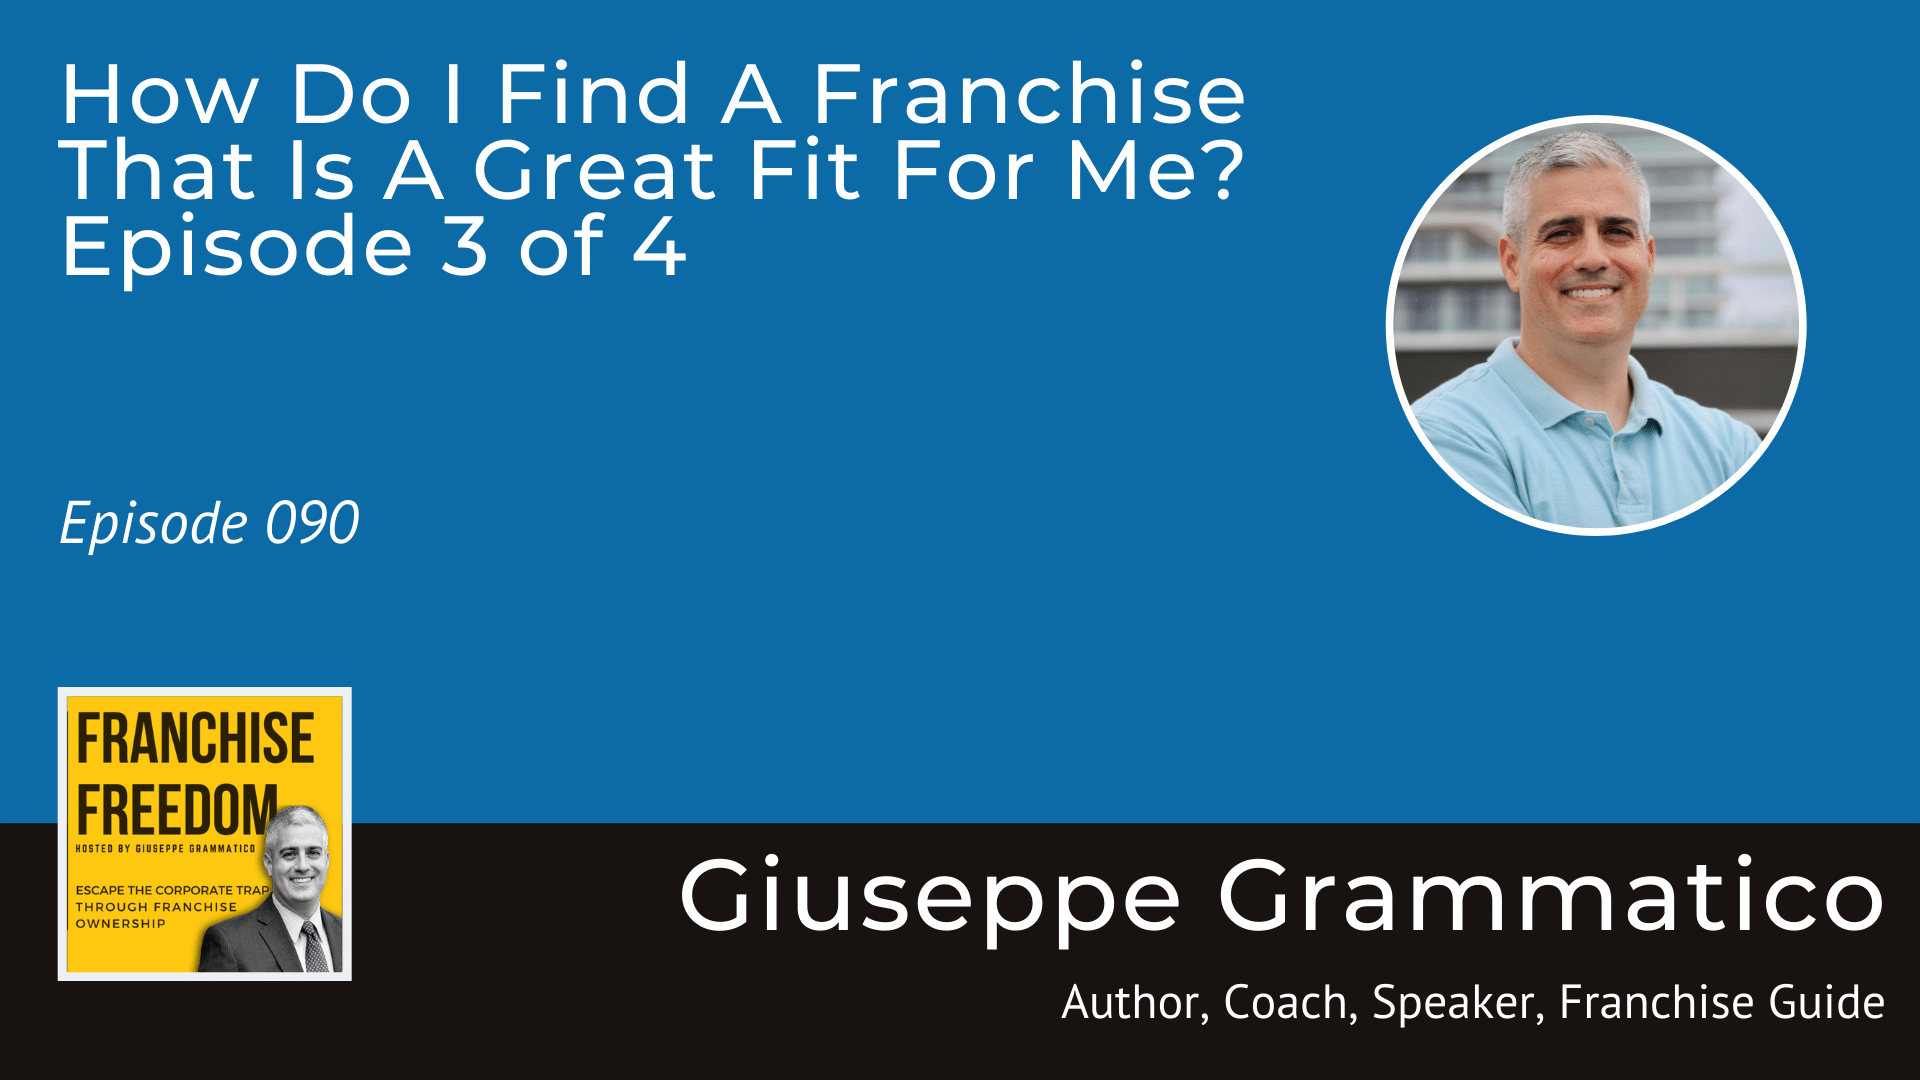 How Do I Find A Franchise That Is A Great Fit For Me? Episode 3 of 4